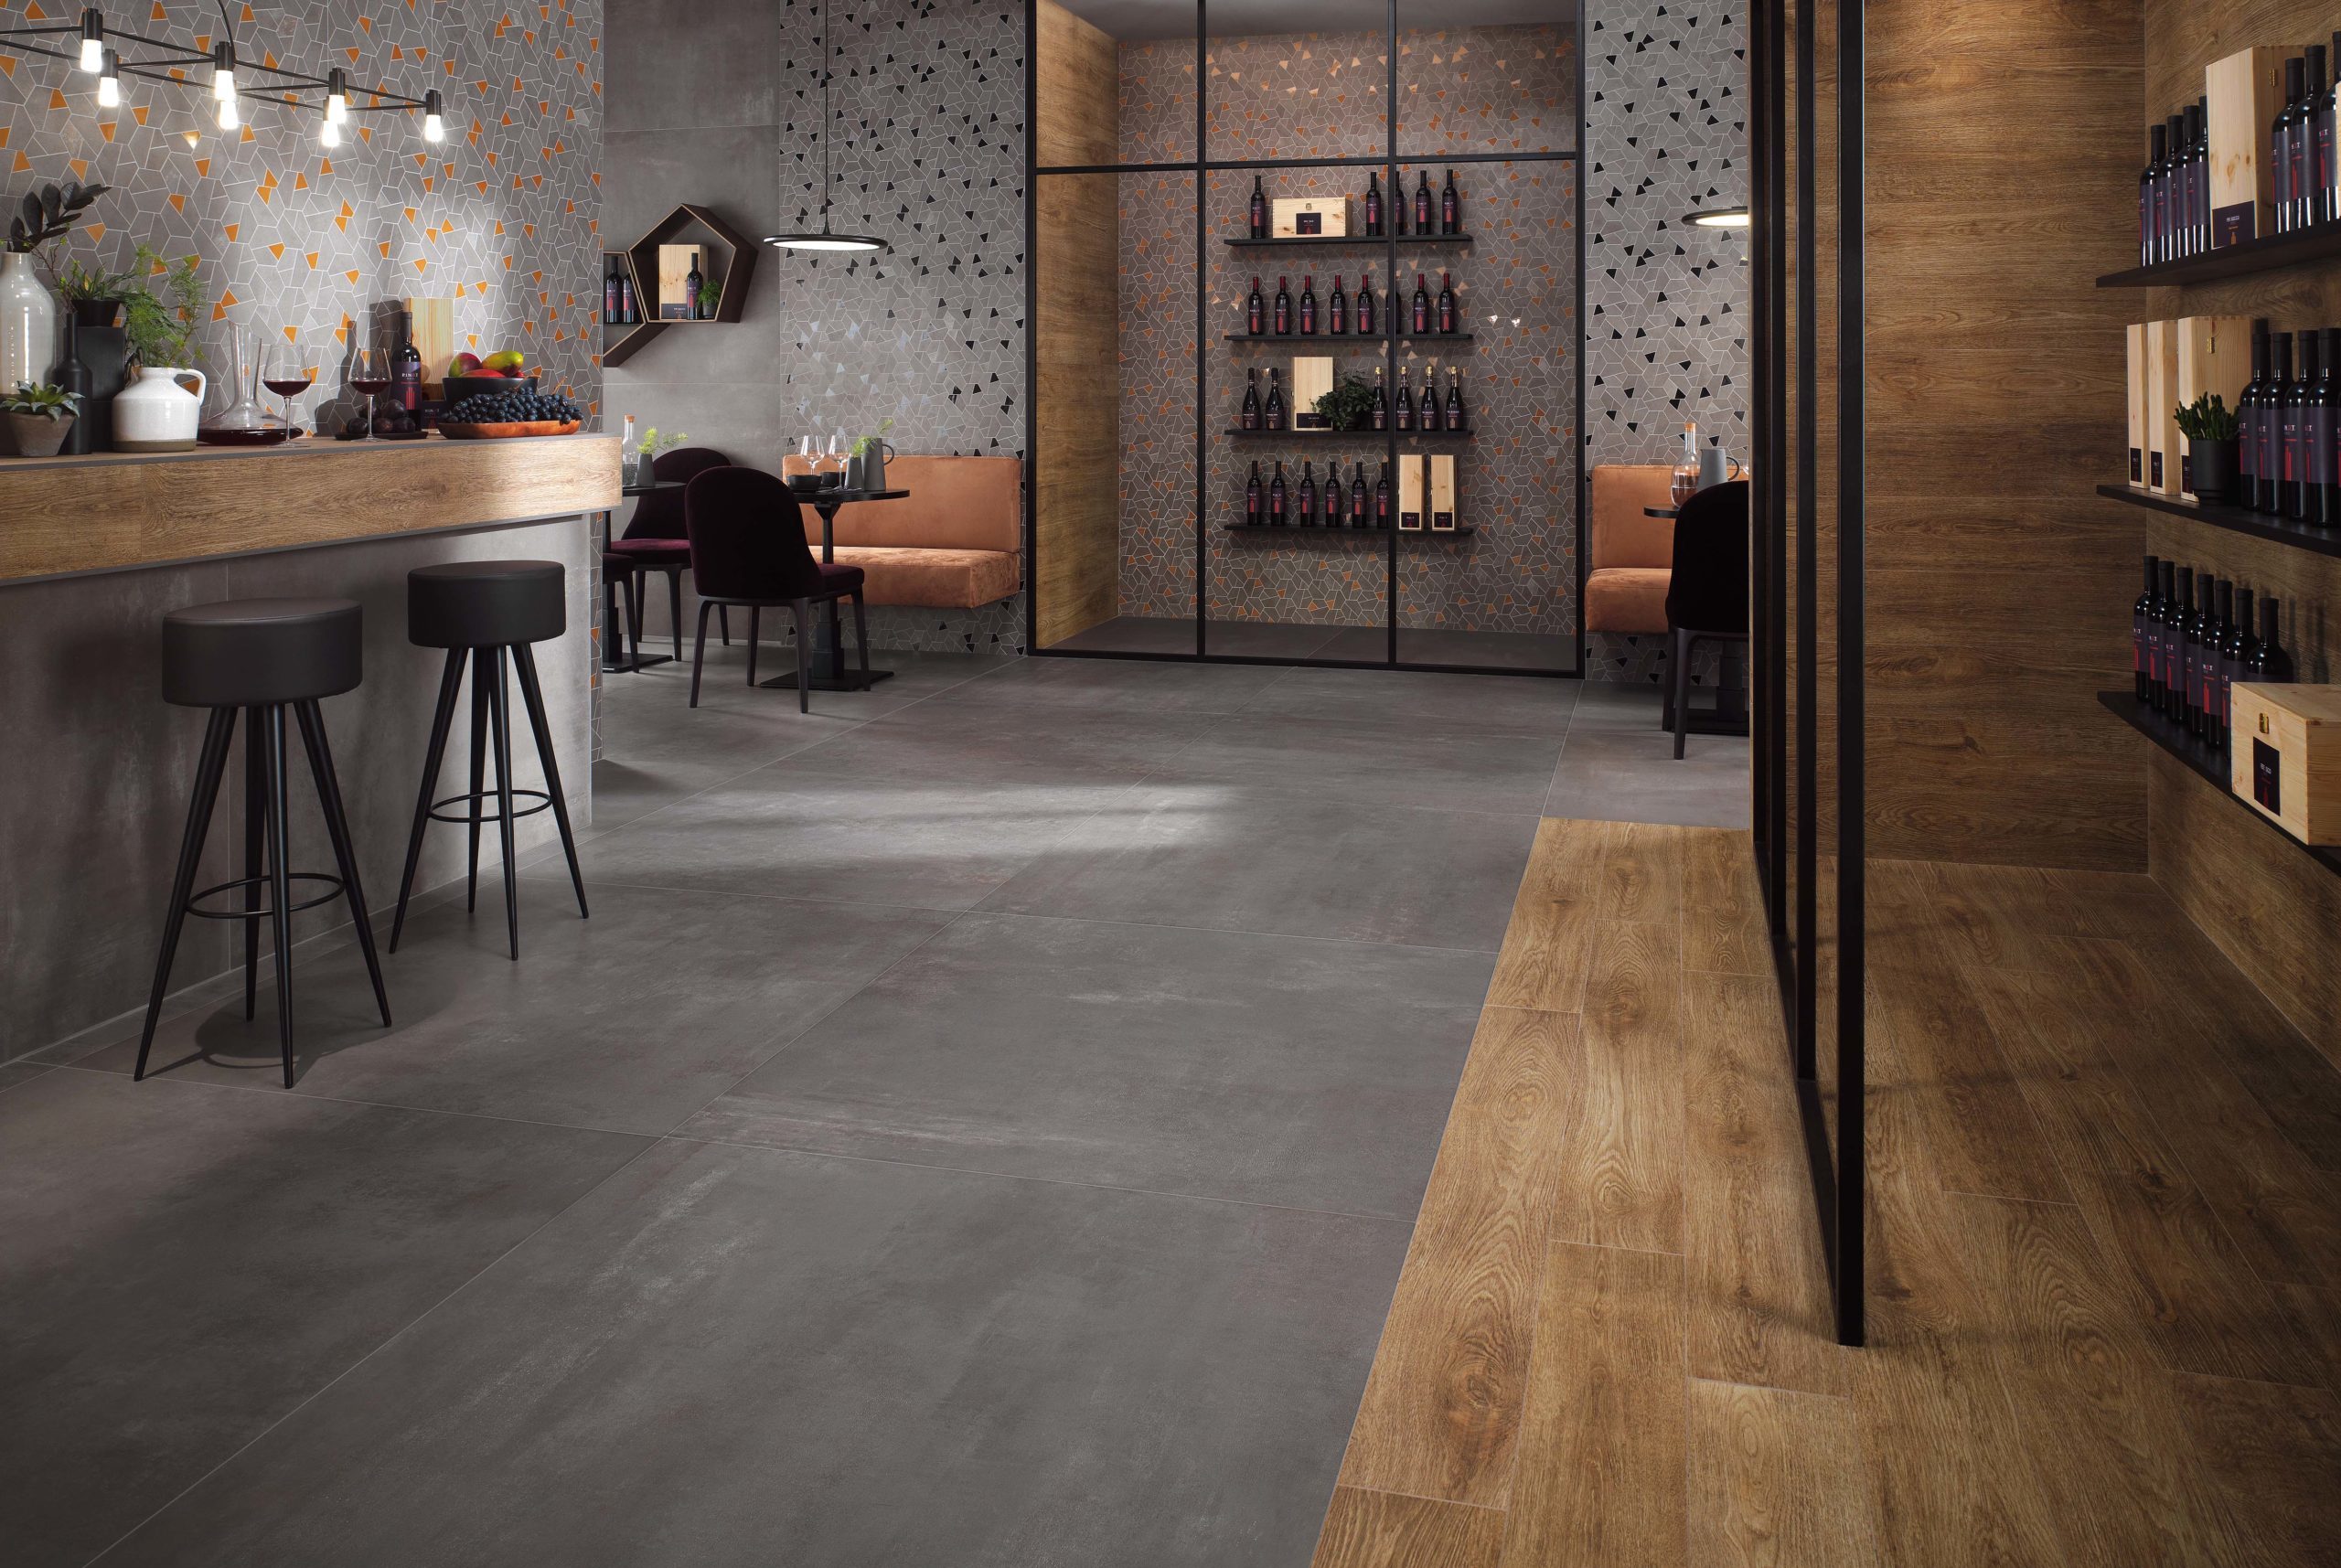 Boost porcelain tile in smoke installed on the floor in a restaurant.